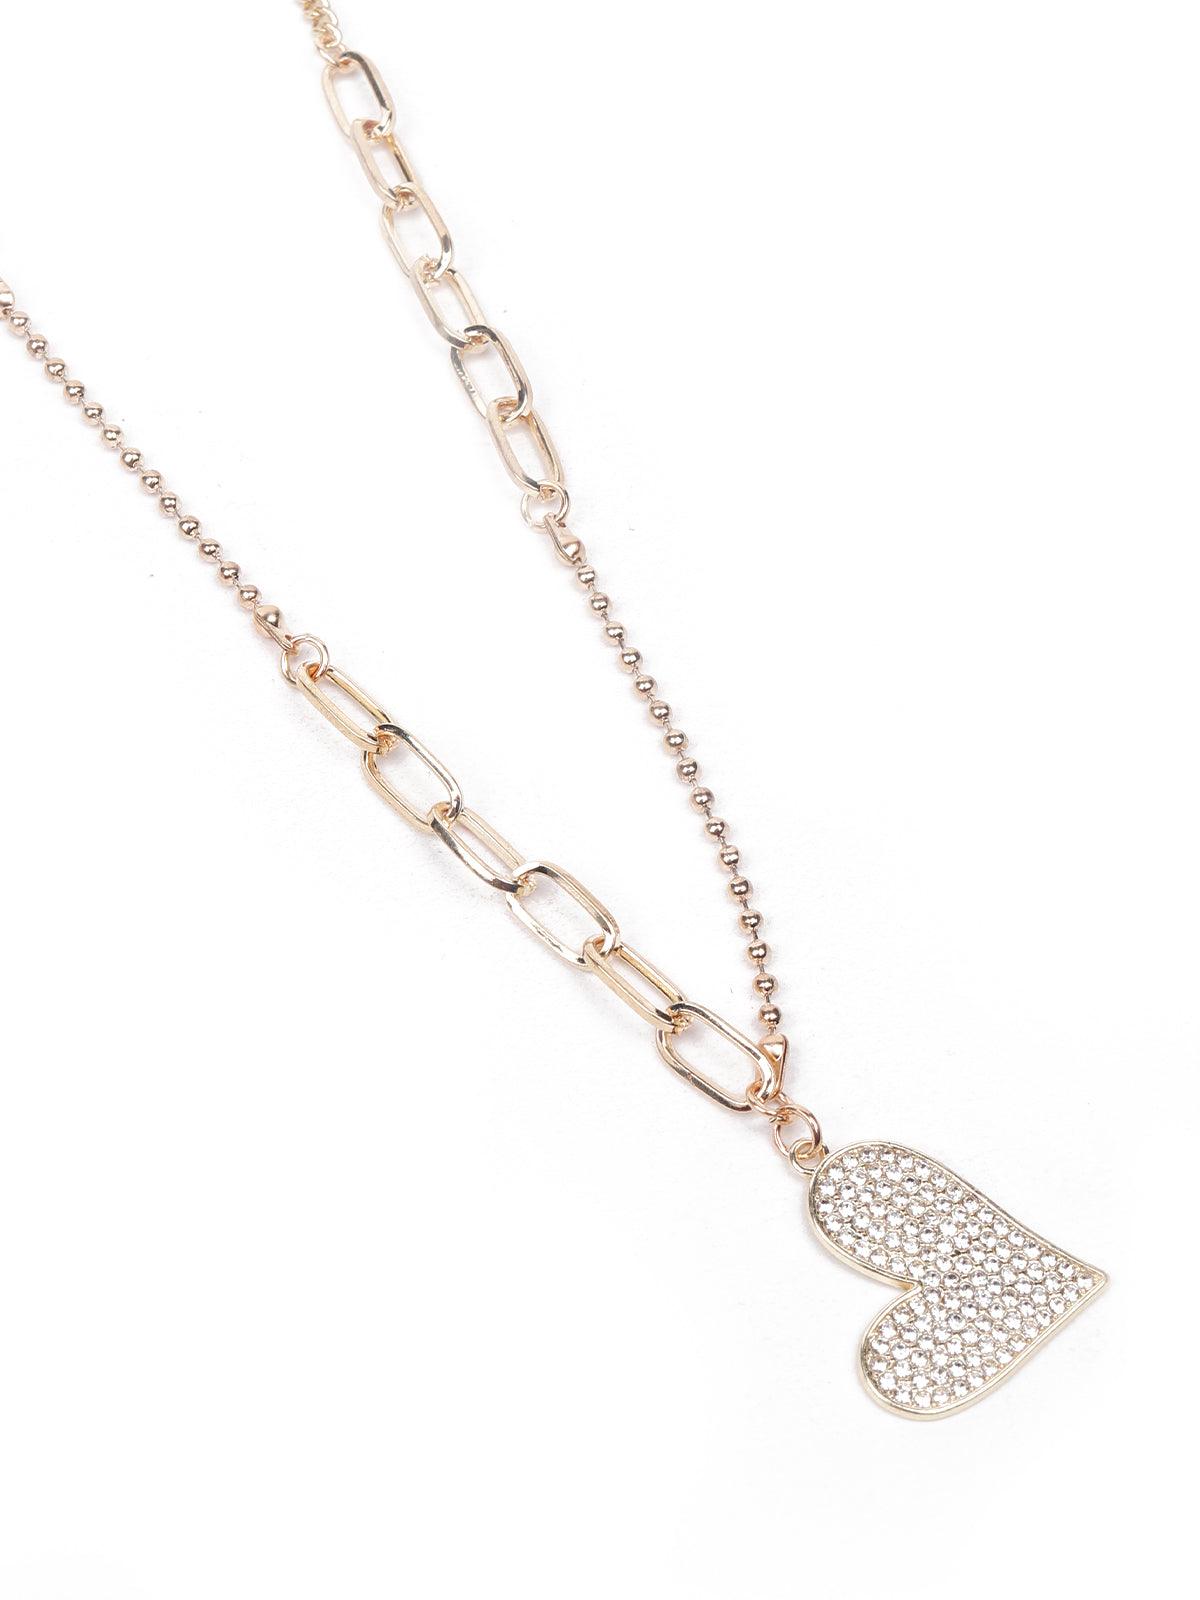 Women's Two-Piece Necklace With A Heart-Shaped Pendant - Odette